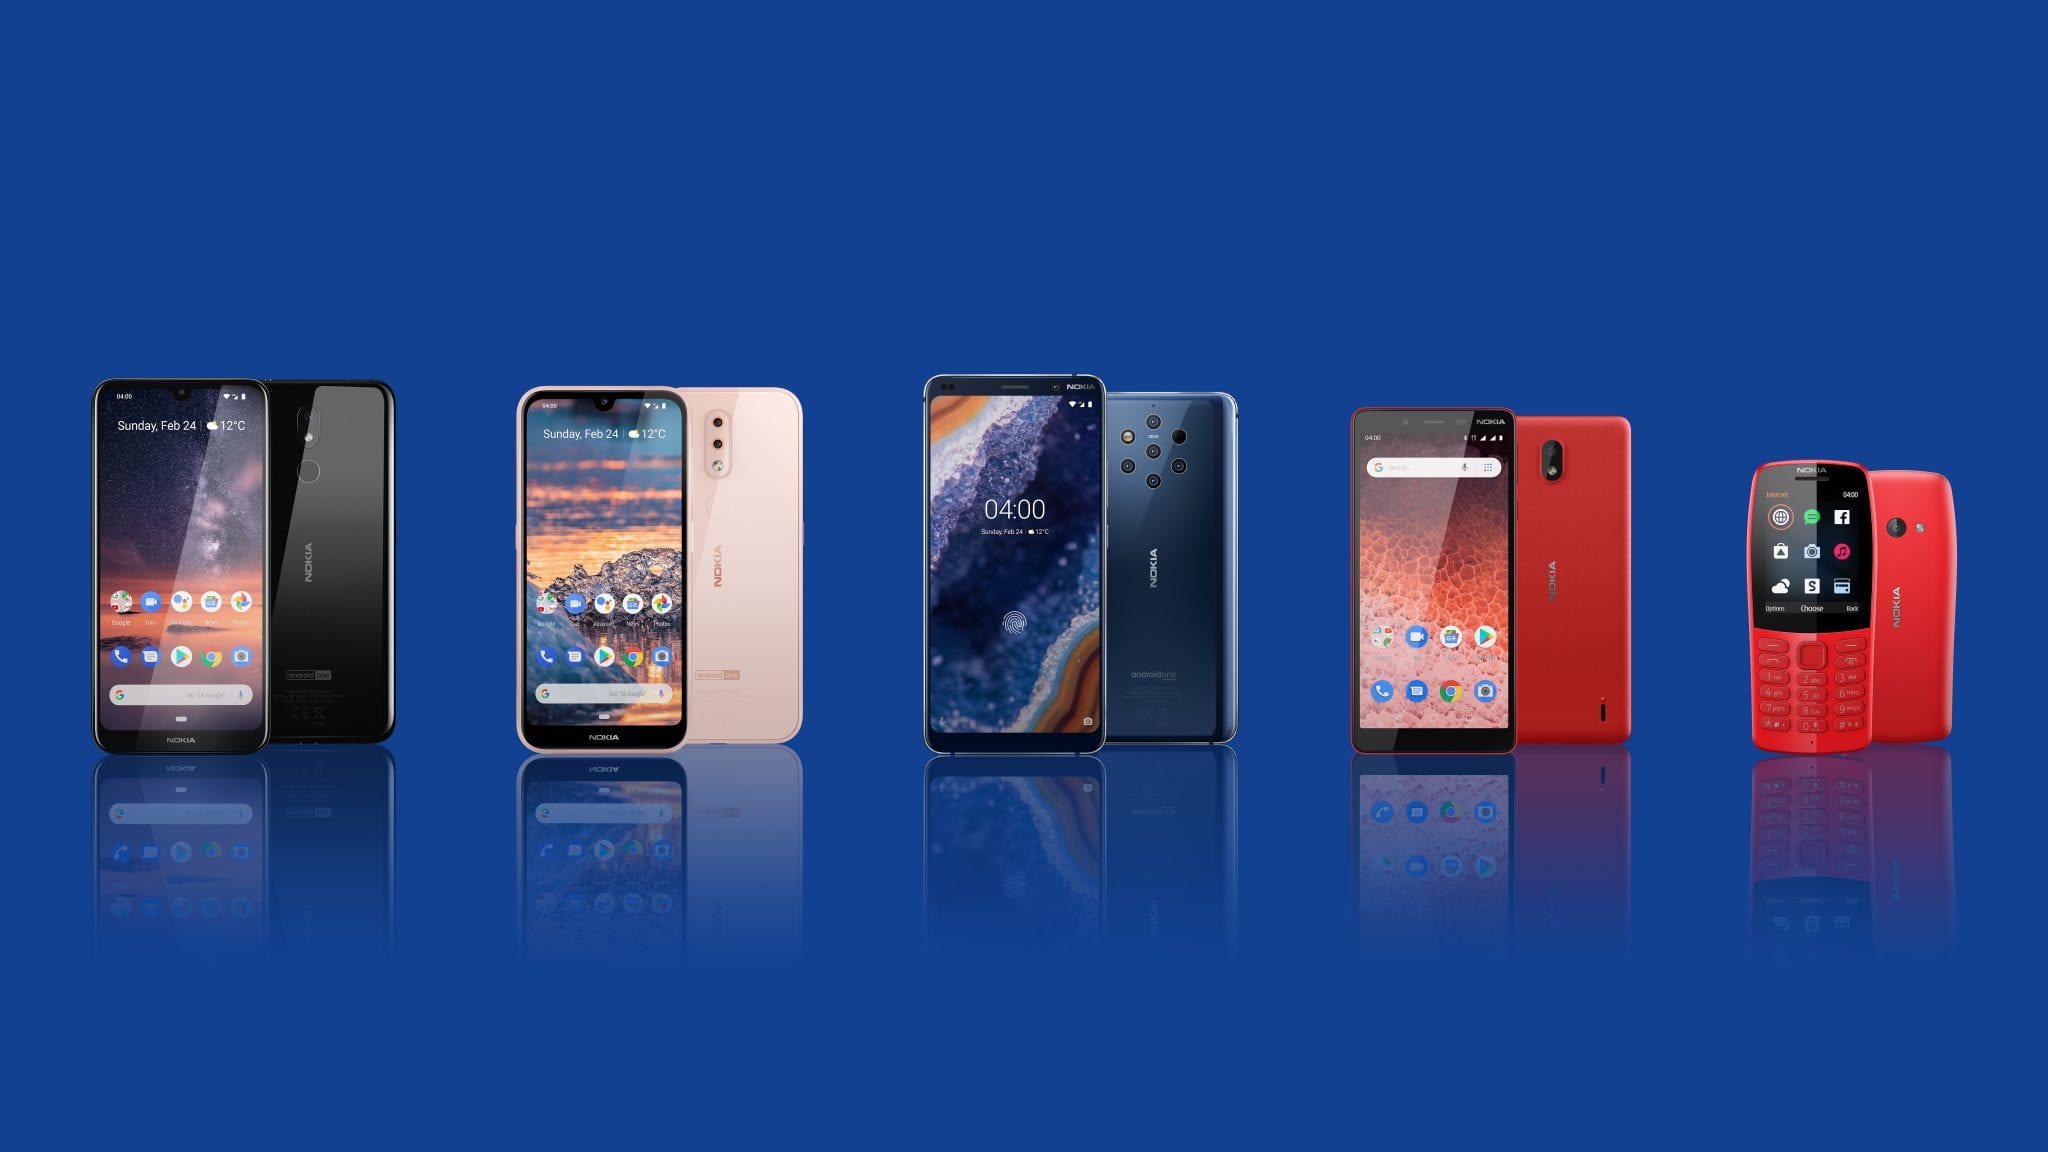 Nokia line-up at MWC 2019